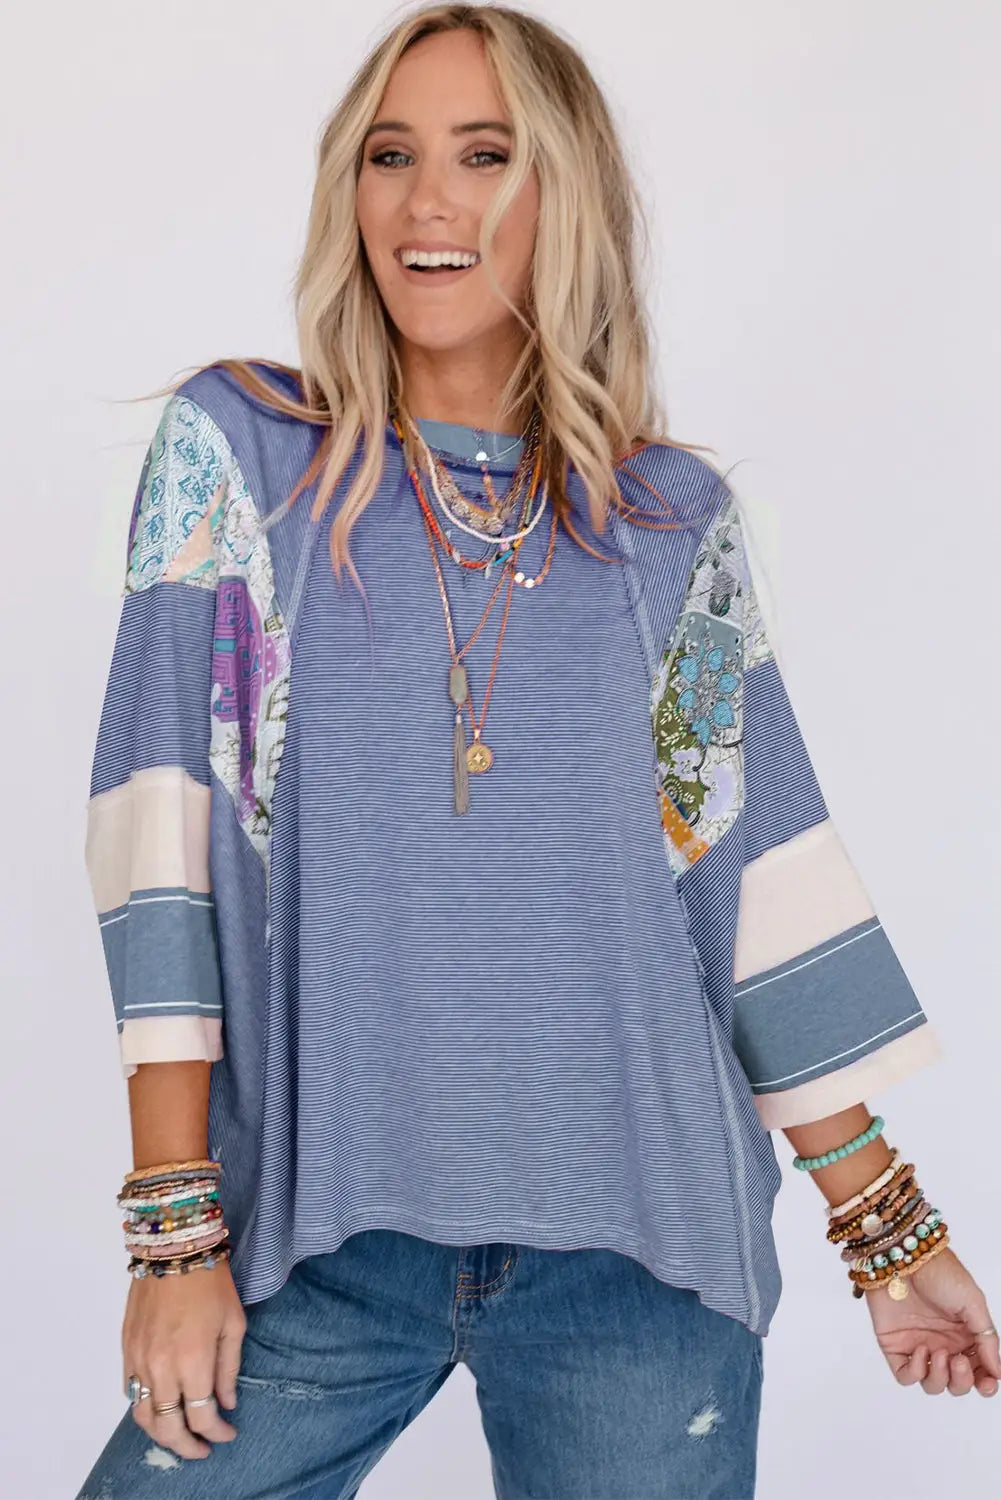 Sky blue printed pinstriped color block patchwork oversized top - long sleeve tops